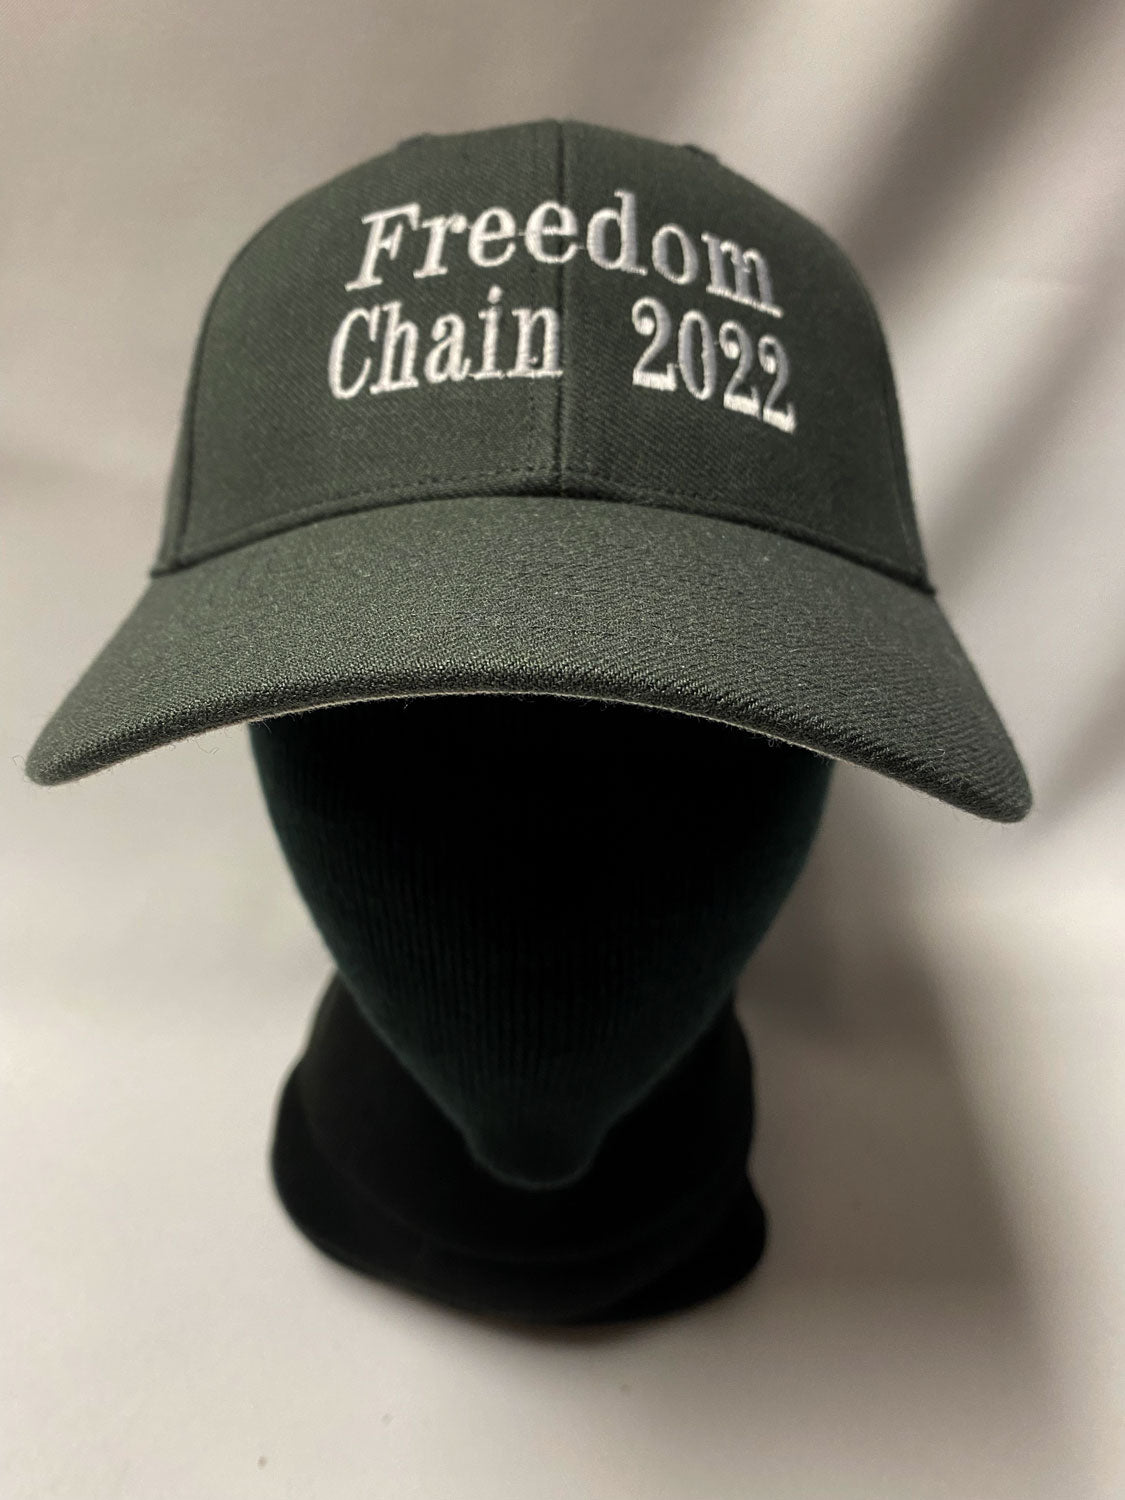 BALL CAP FREEDOM CHAIN 2022 - white embroidery on green